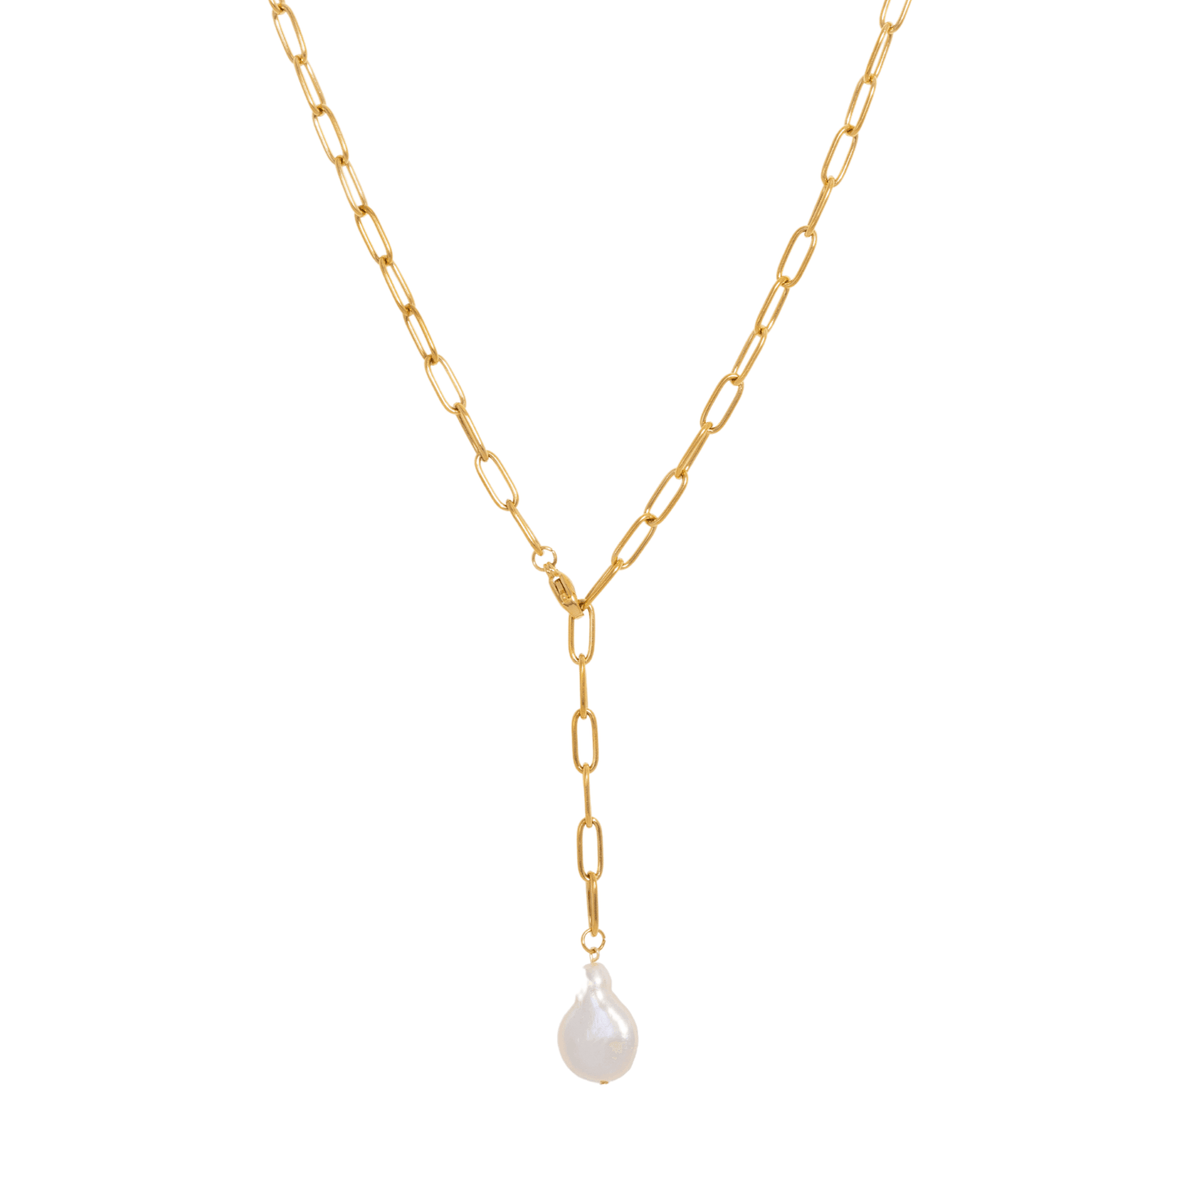 BohoMoon Stainless Steel Miyan Pearl Lariat Necklace Gold